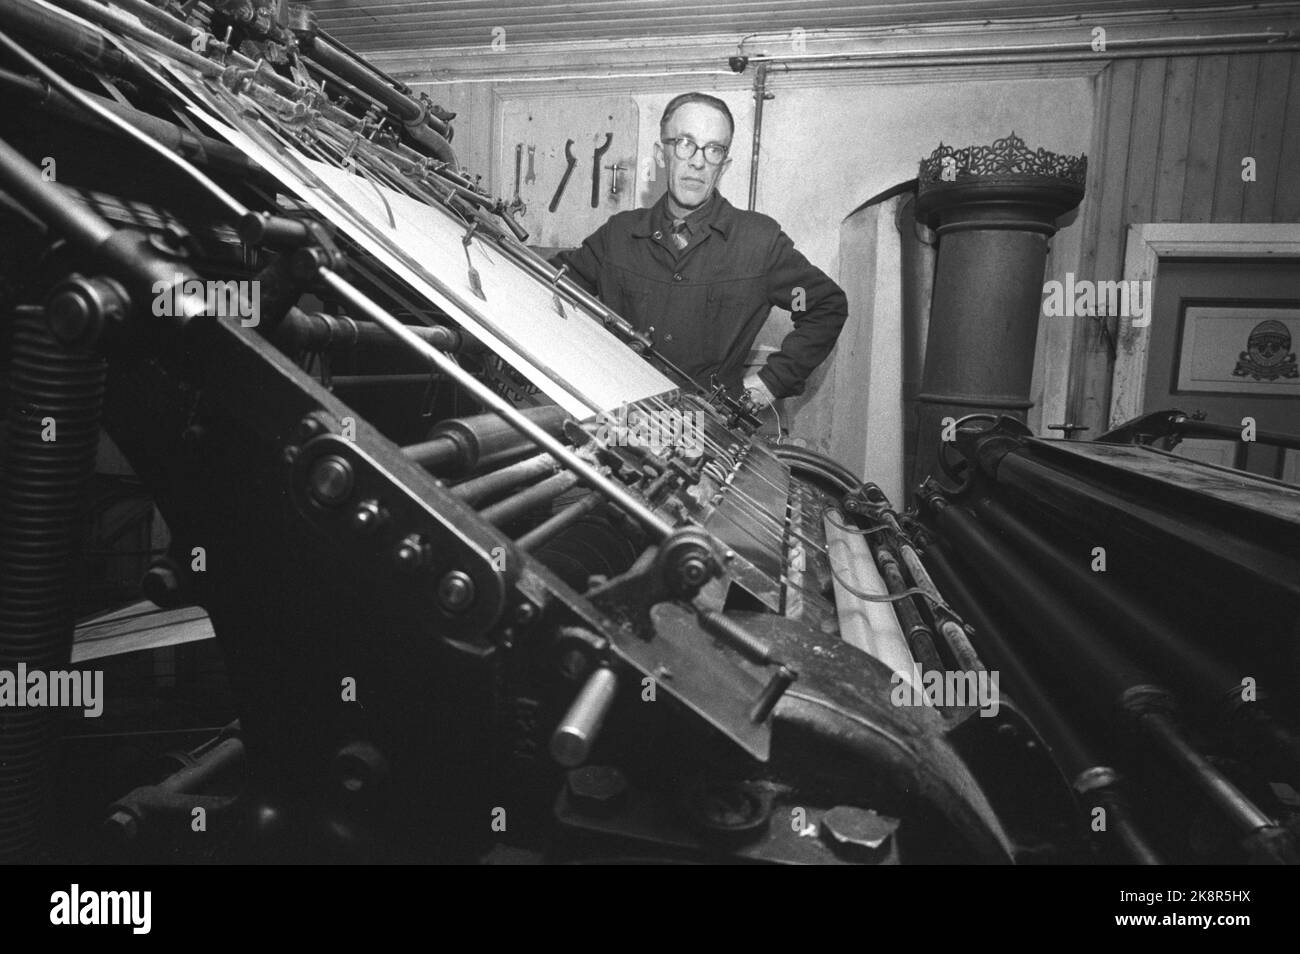 Printing press newspaper Black and White Stock Photos & Images - Alamy